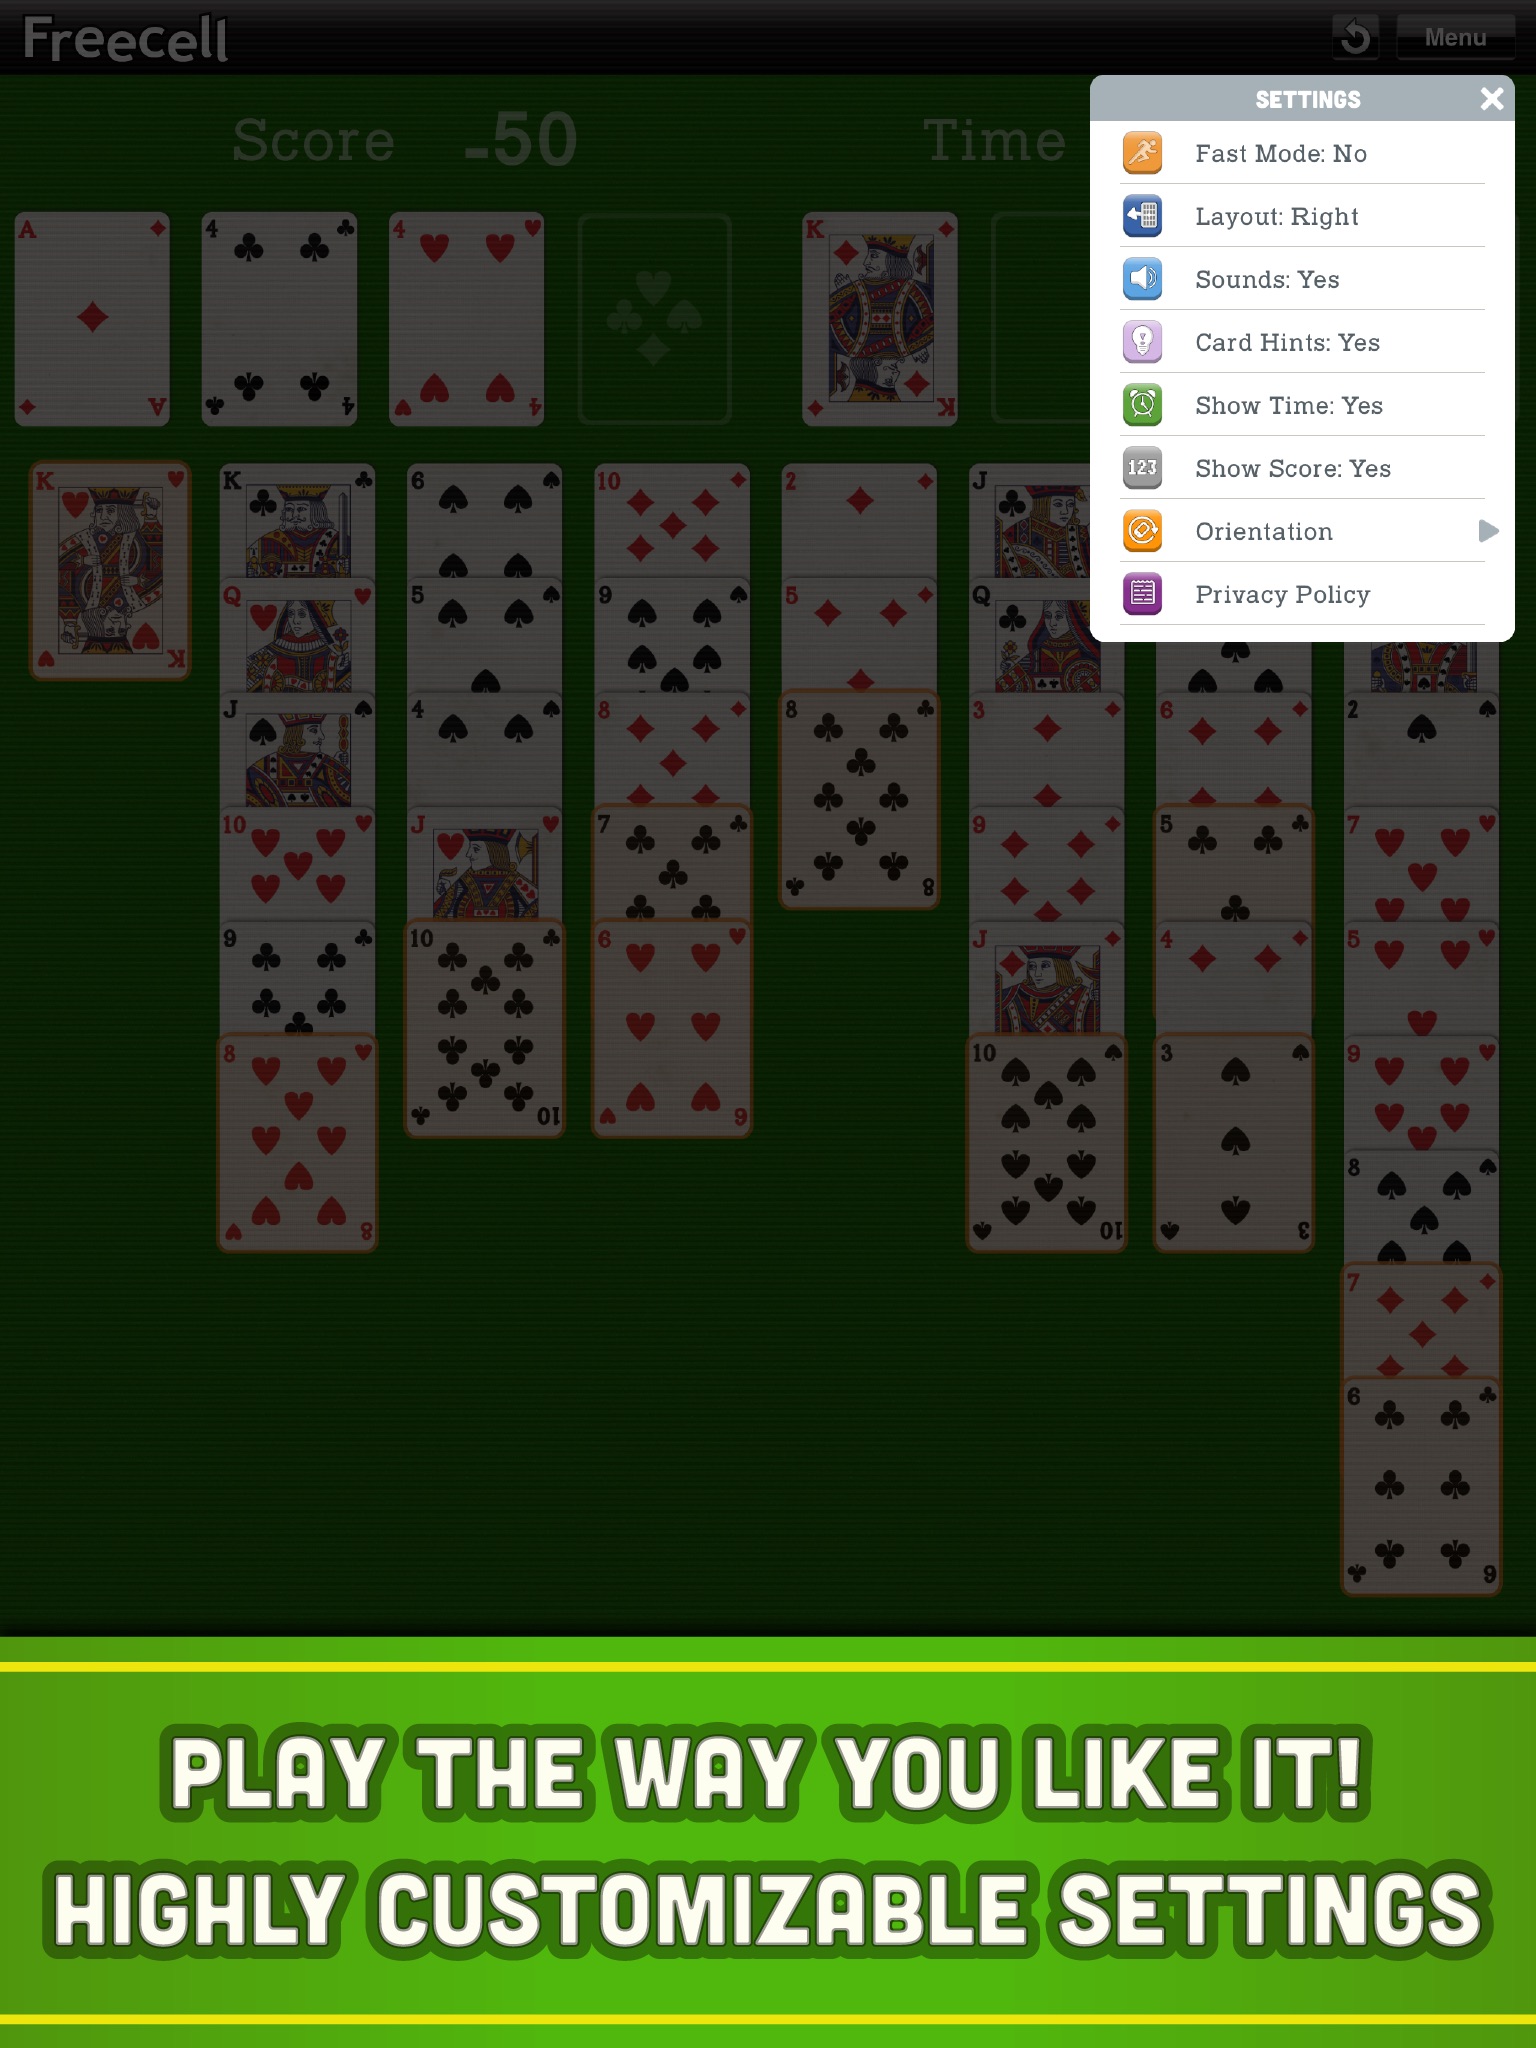 Freecell - Classic Solitaire screenshot 4